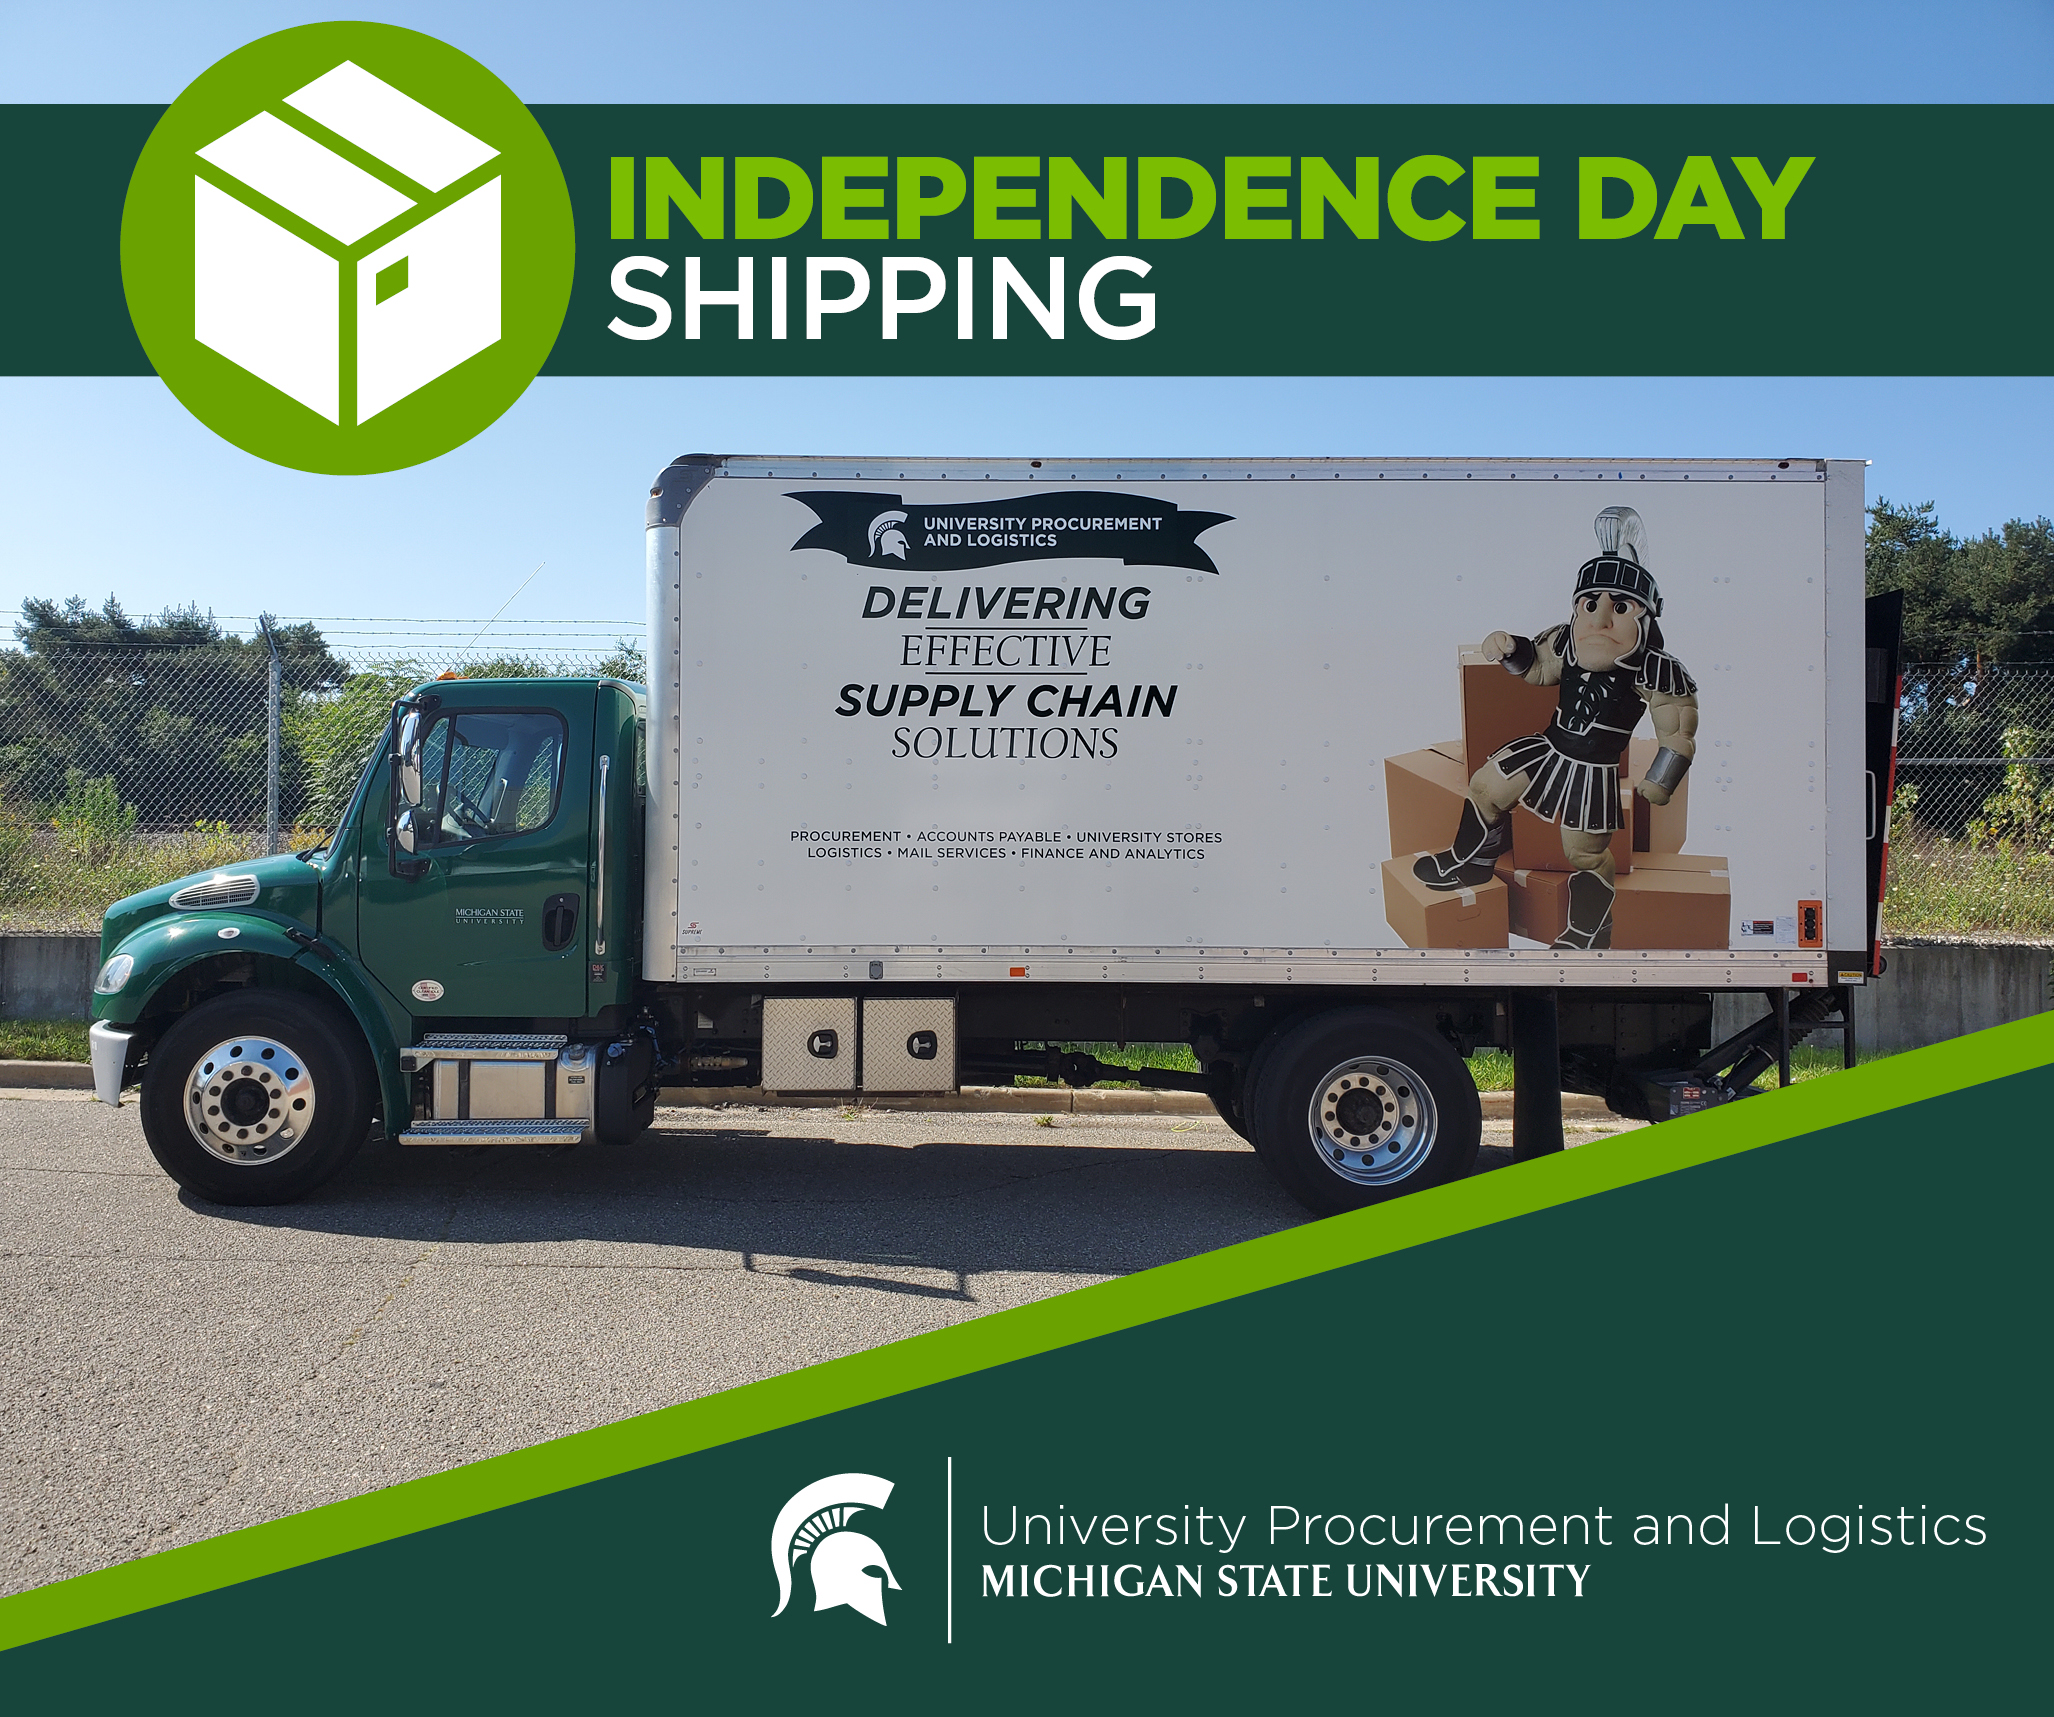 An image of a UPL delivery truck with title text above in a green banner that says "Independence Day shipping." The UPL signature logo is displayed in the bottom right corner of the image. 